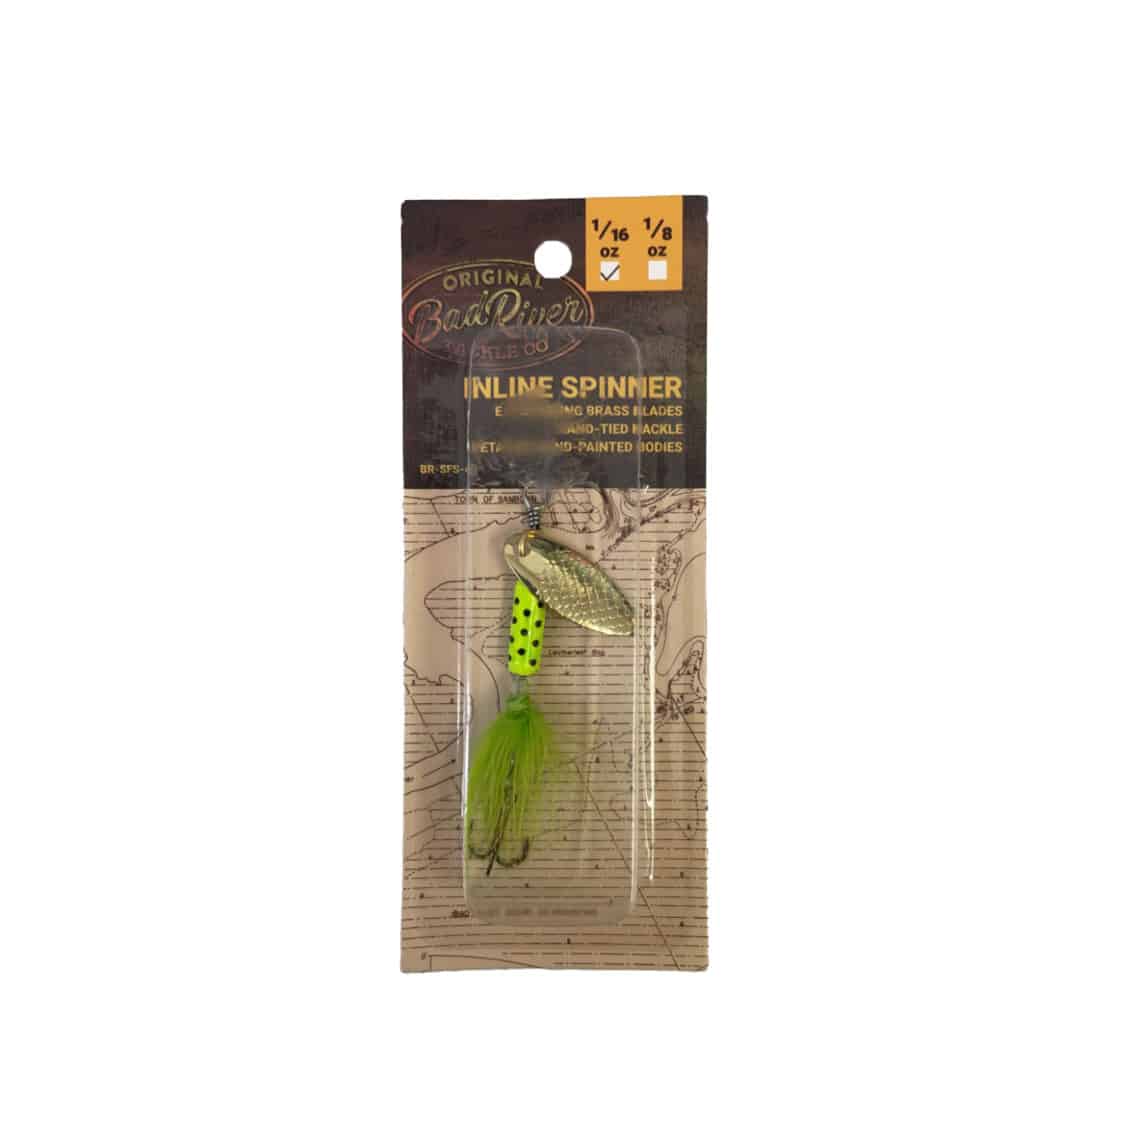 CLOSEOUT* BAD RIVER INLINE SPINNER (ONLINE ONLY) - Northwoods